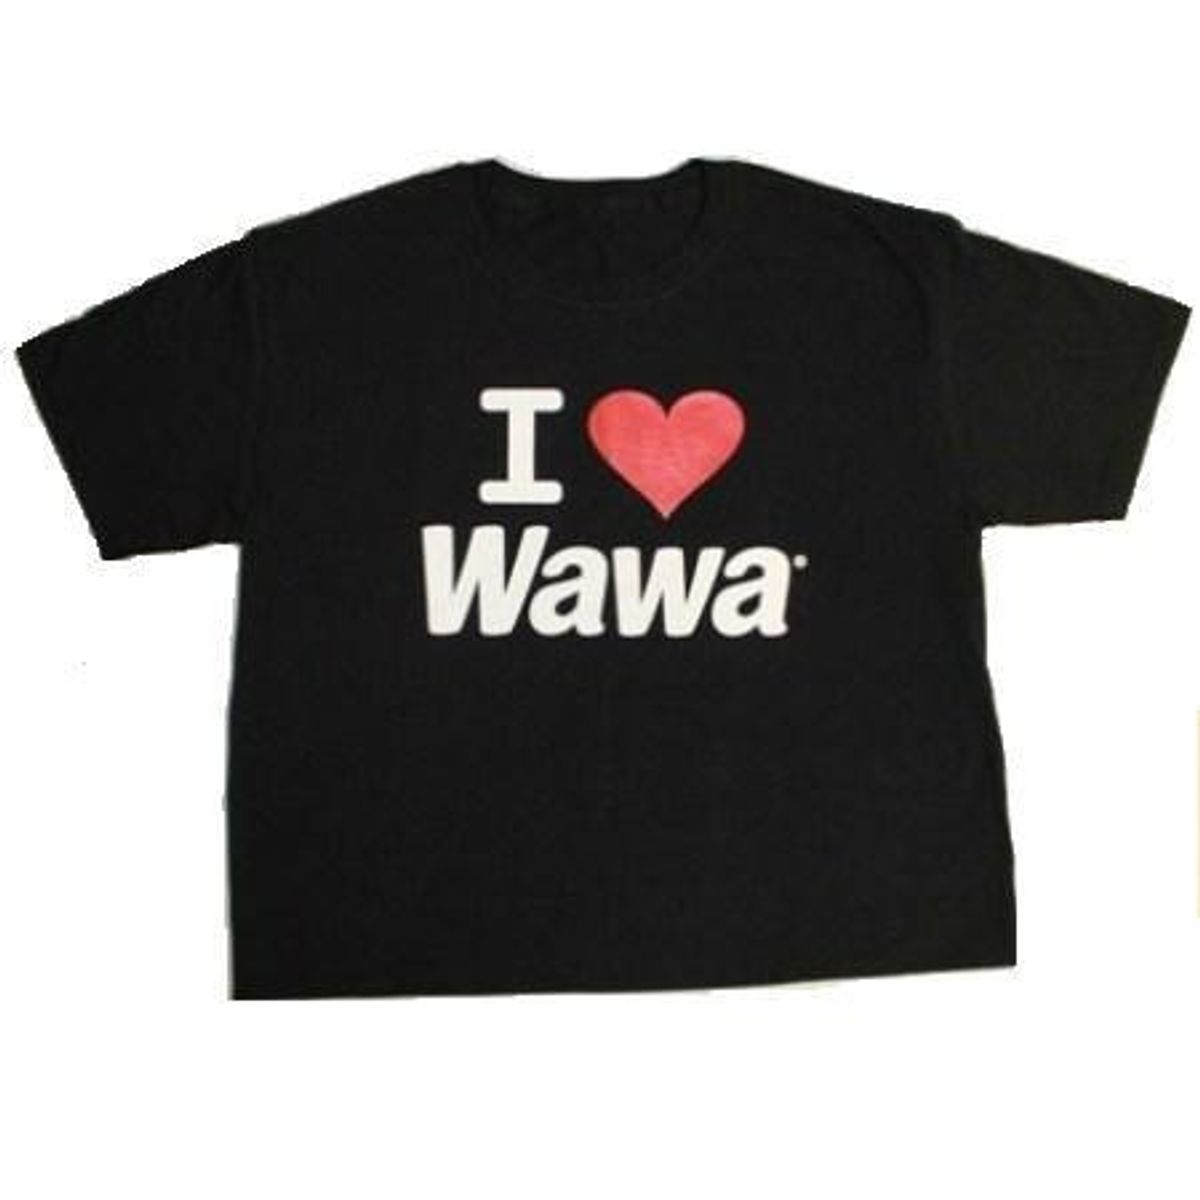 A Love Letter to Wawa